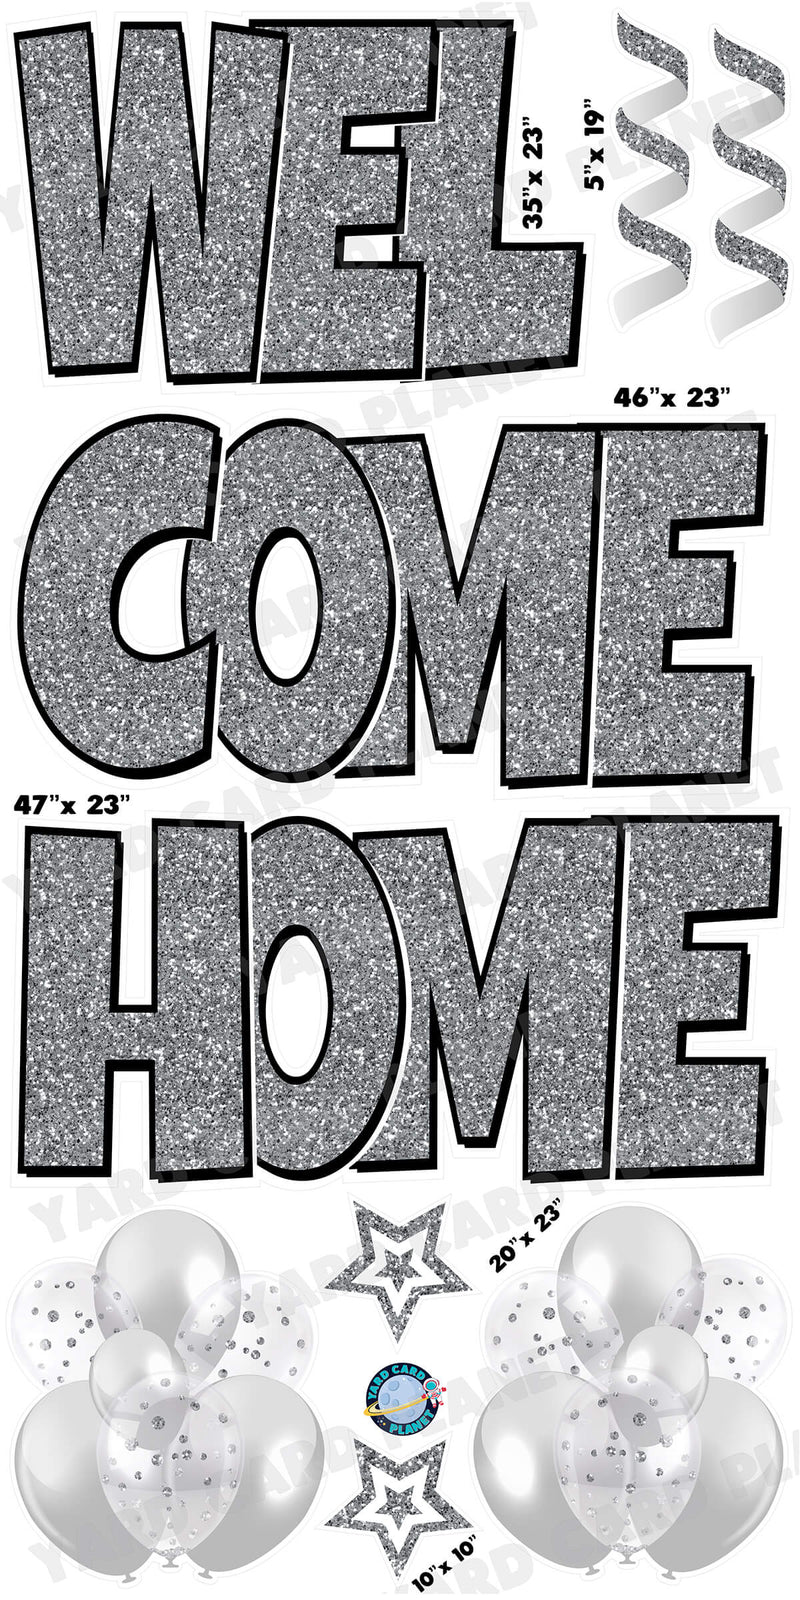 Large 23" Welcome Home Yard Card EZ Quick Sets in Luckiest Guy Font and Flair in Silver Glitter Pattern